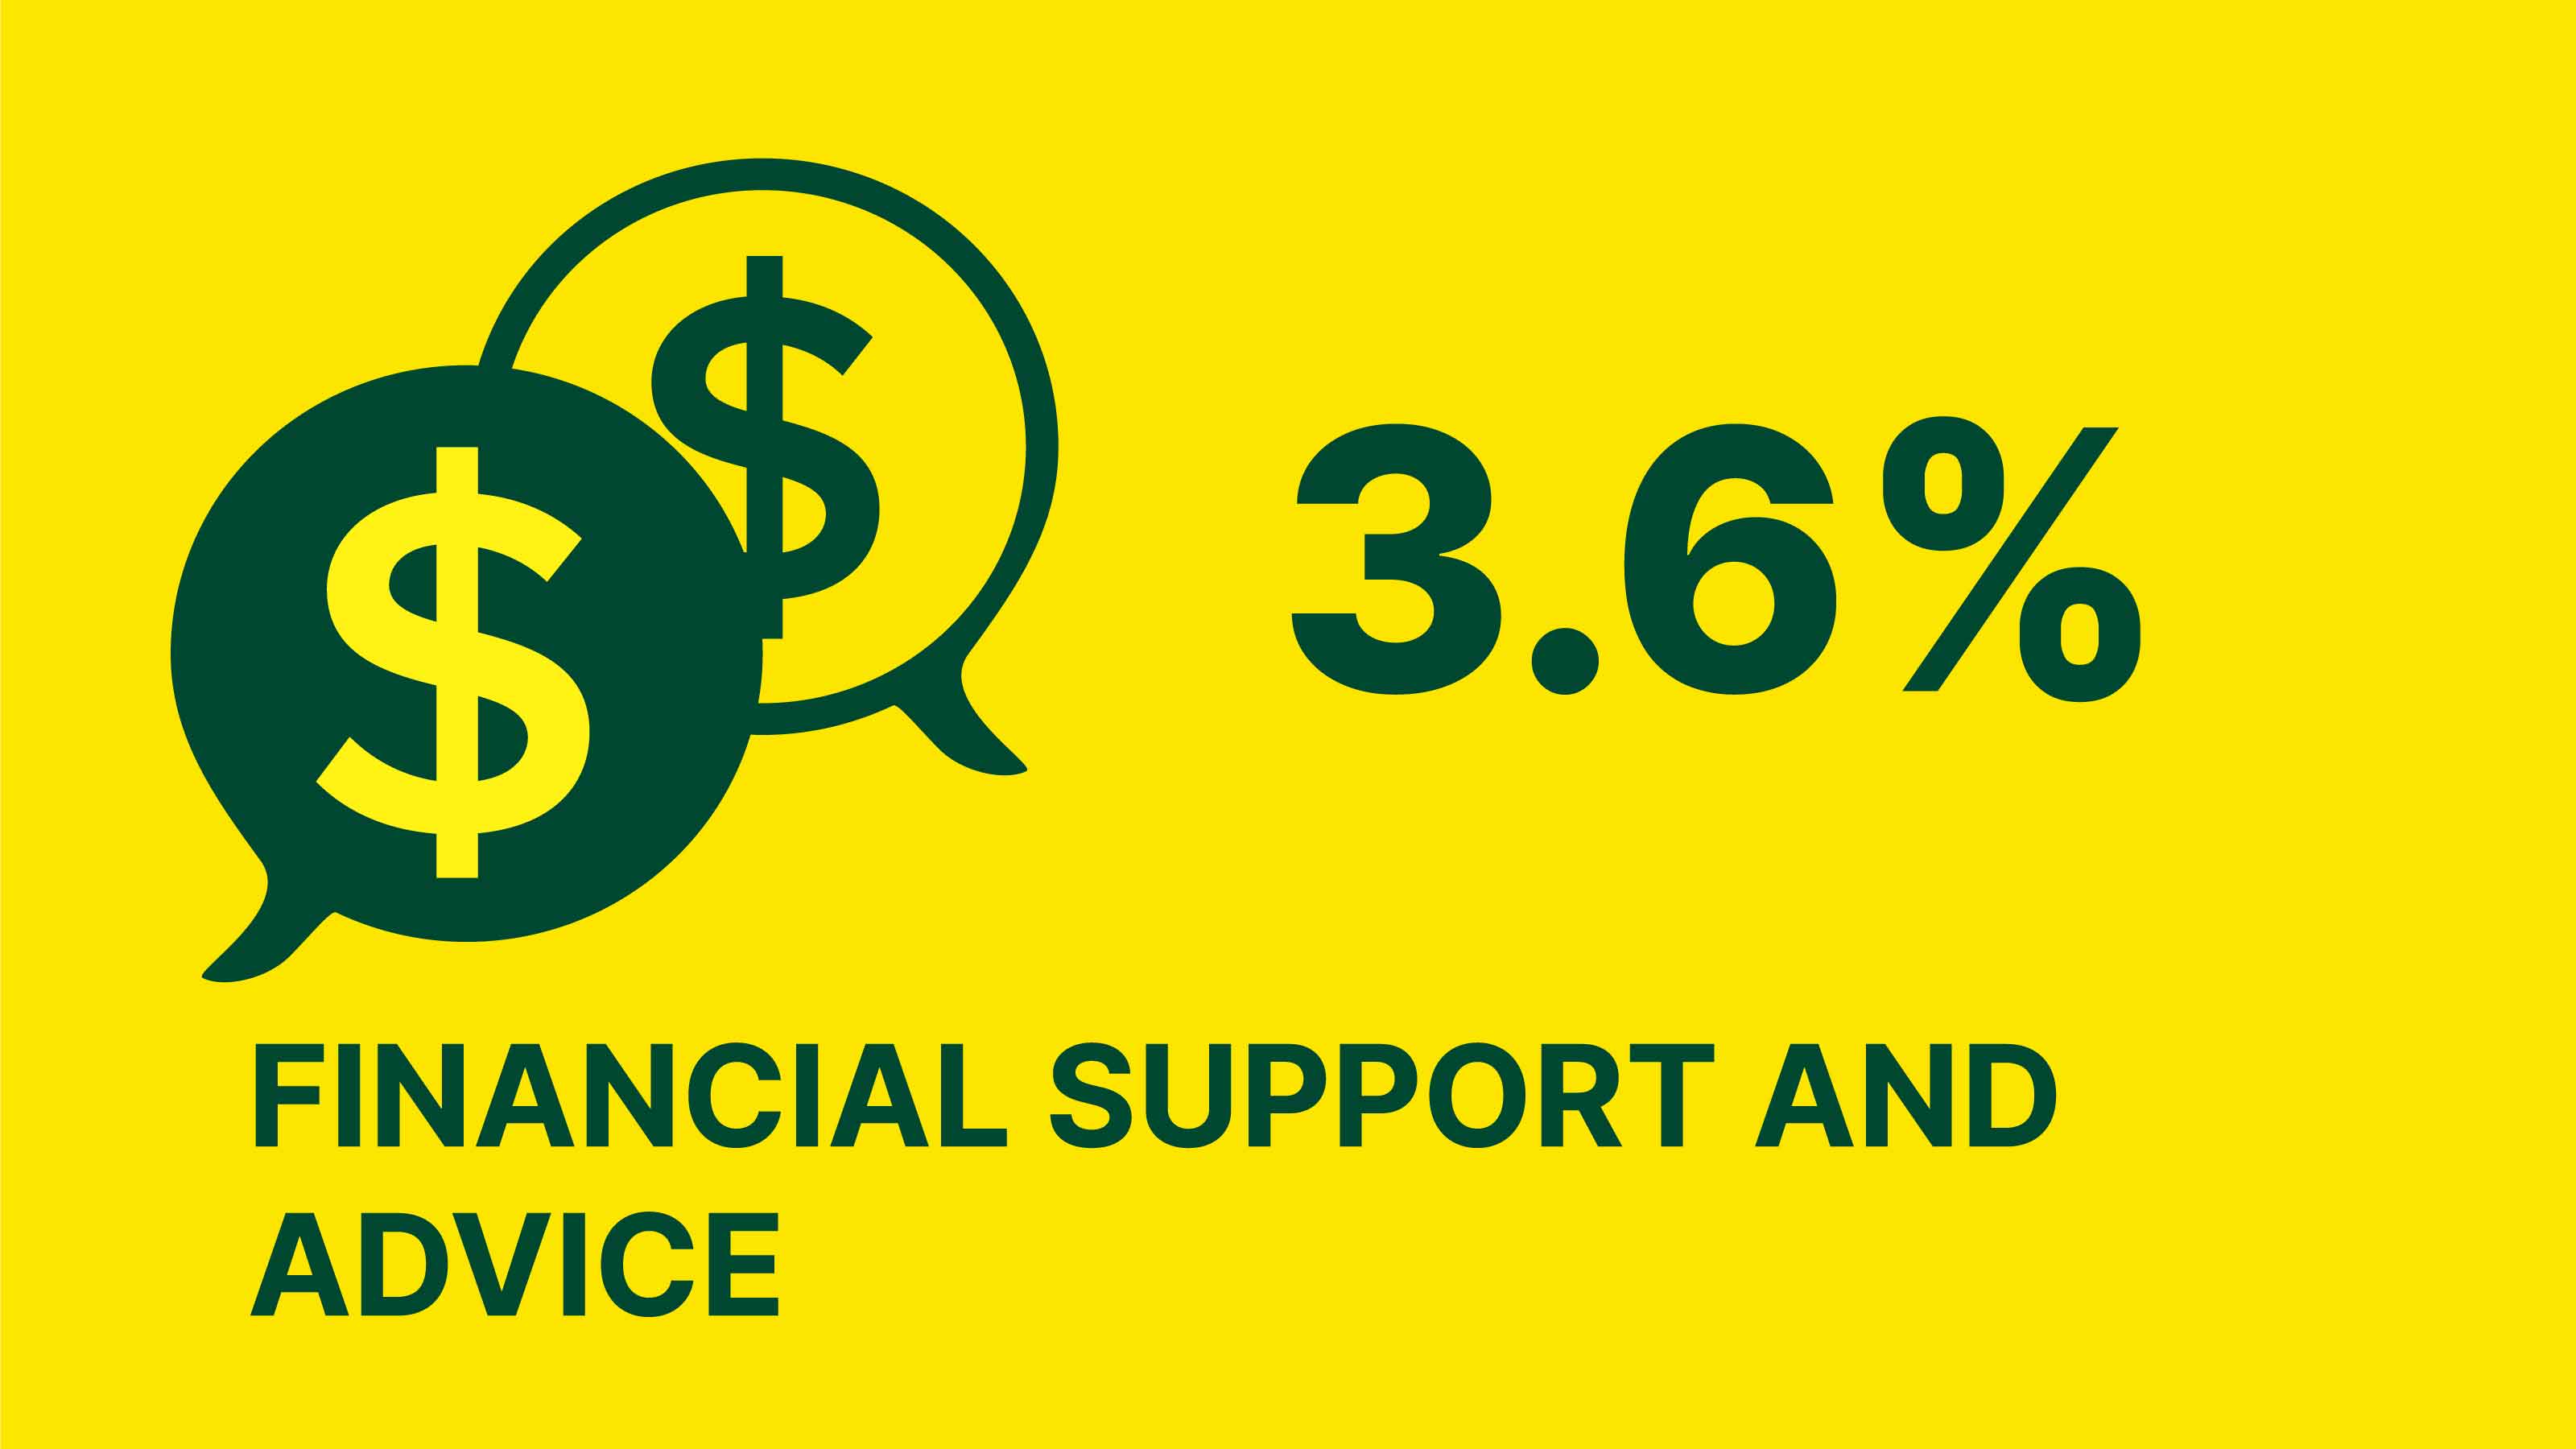 Infographic showing 3.6% of the levy goes to financial support and advice